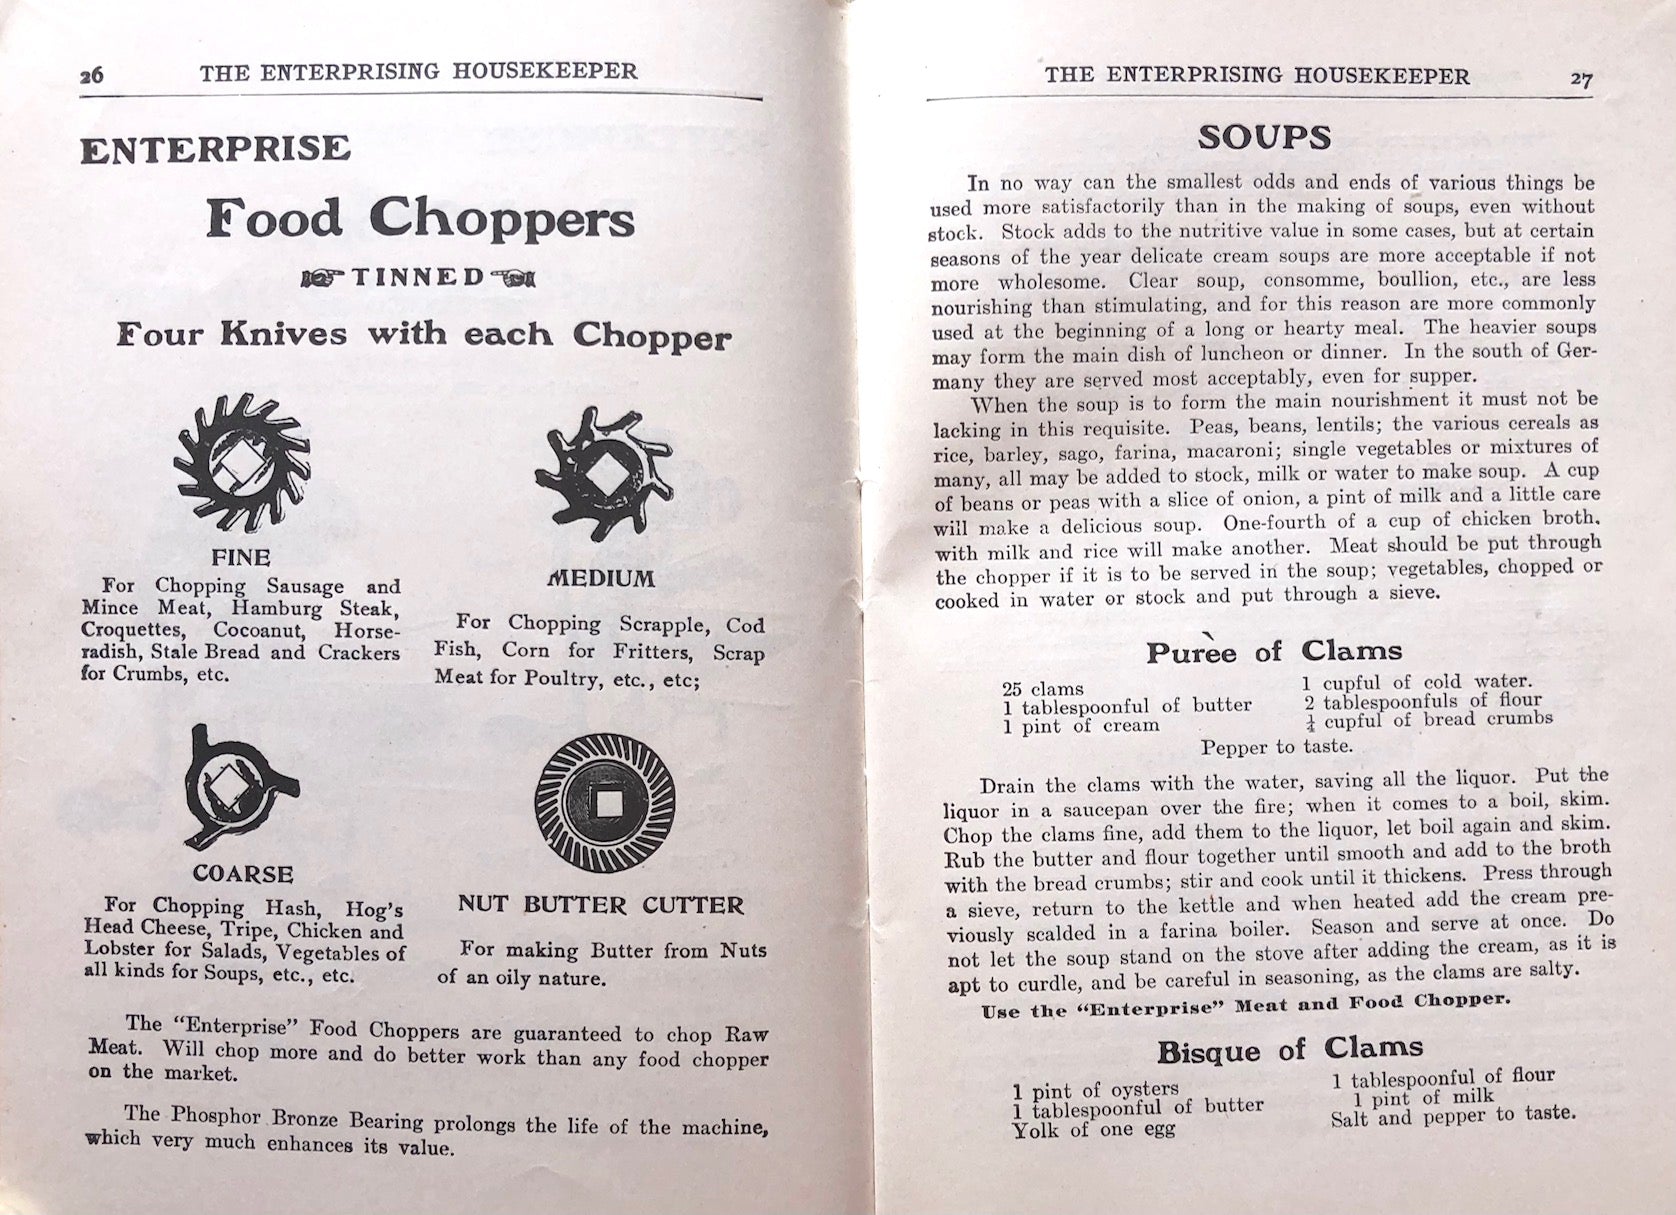 (Booklet) Helen Louise Johnson. The Enterprising Housekeeper: Suggestions for Breakfast, Luncheon and Supper.